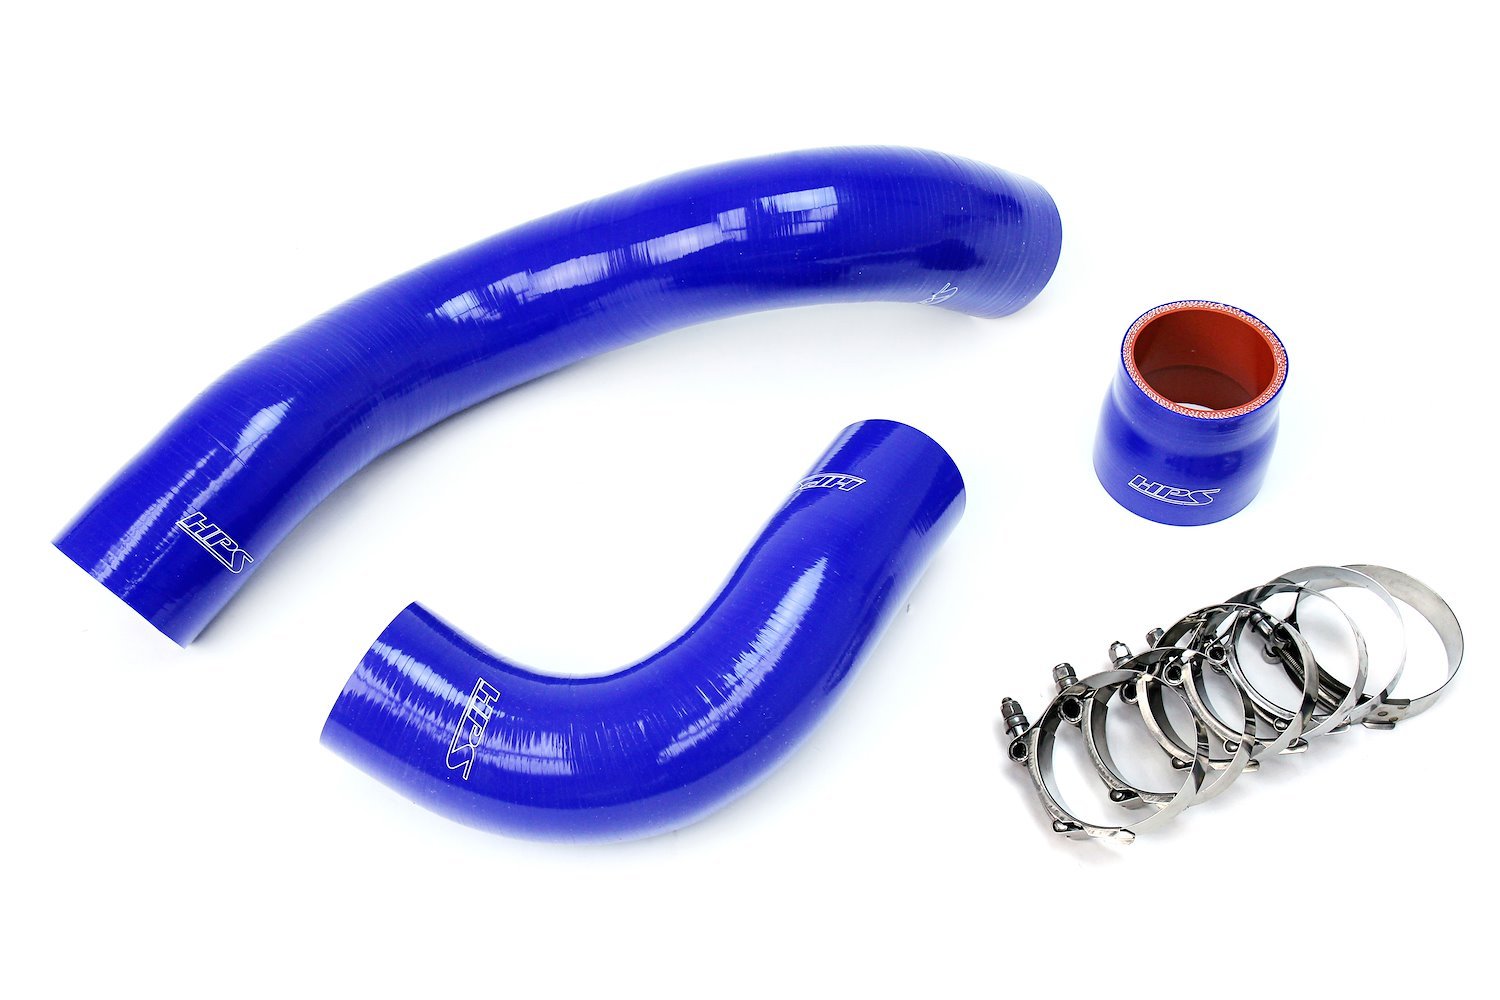 57-1697-BLUE Intercooler Hose Kit, High-Temp Resistant 4-Ply Reinforced Silicone, Replaces Rubber Intercooler Hoses